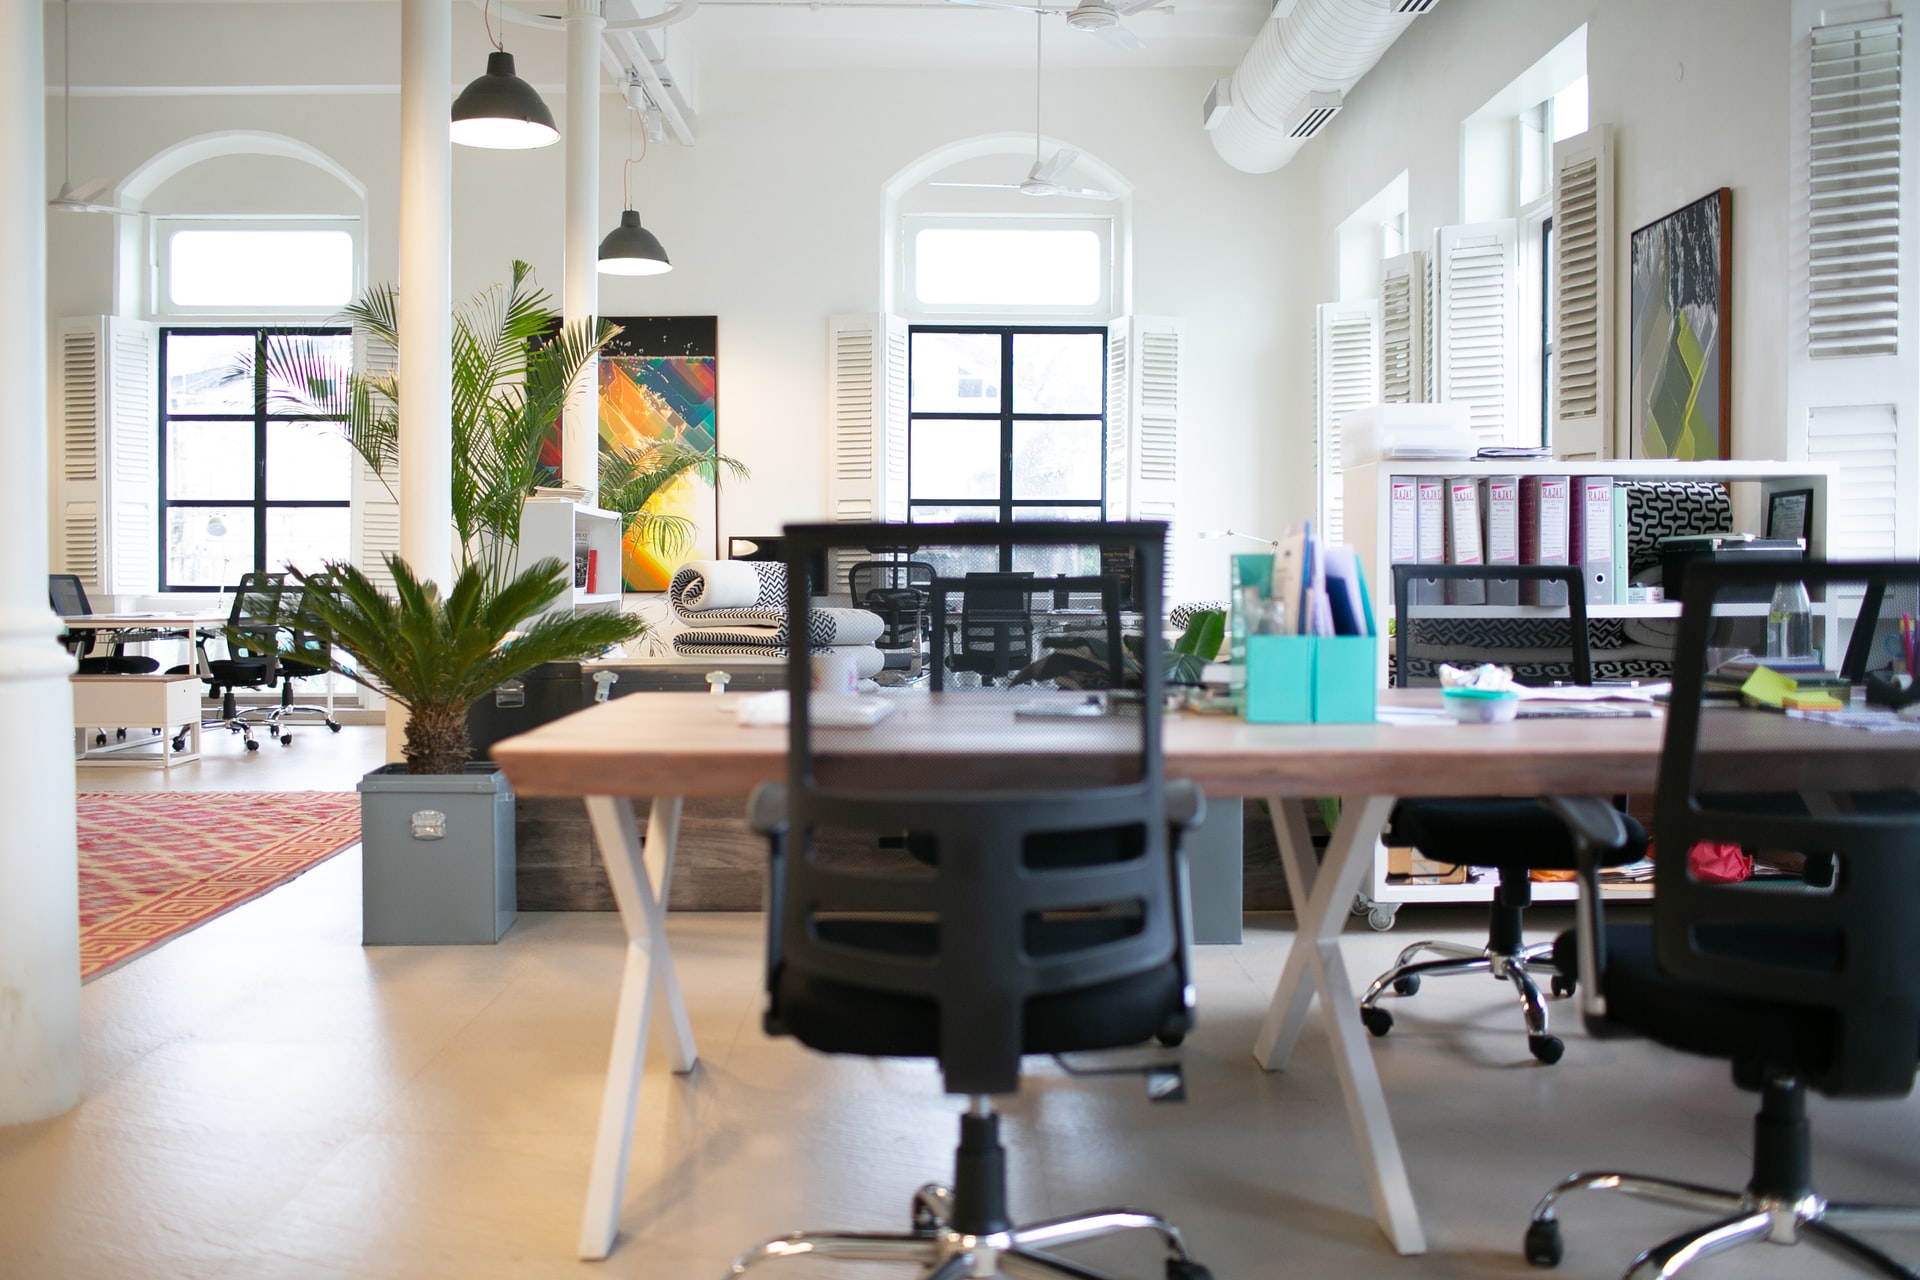 5 Expert Tips To Choose An Office Chair - VisualHunt